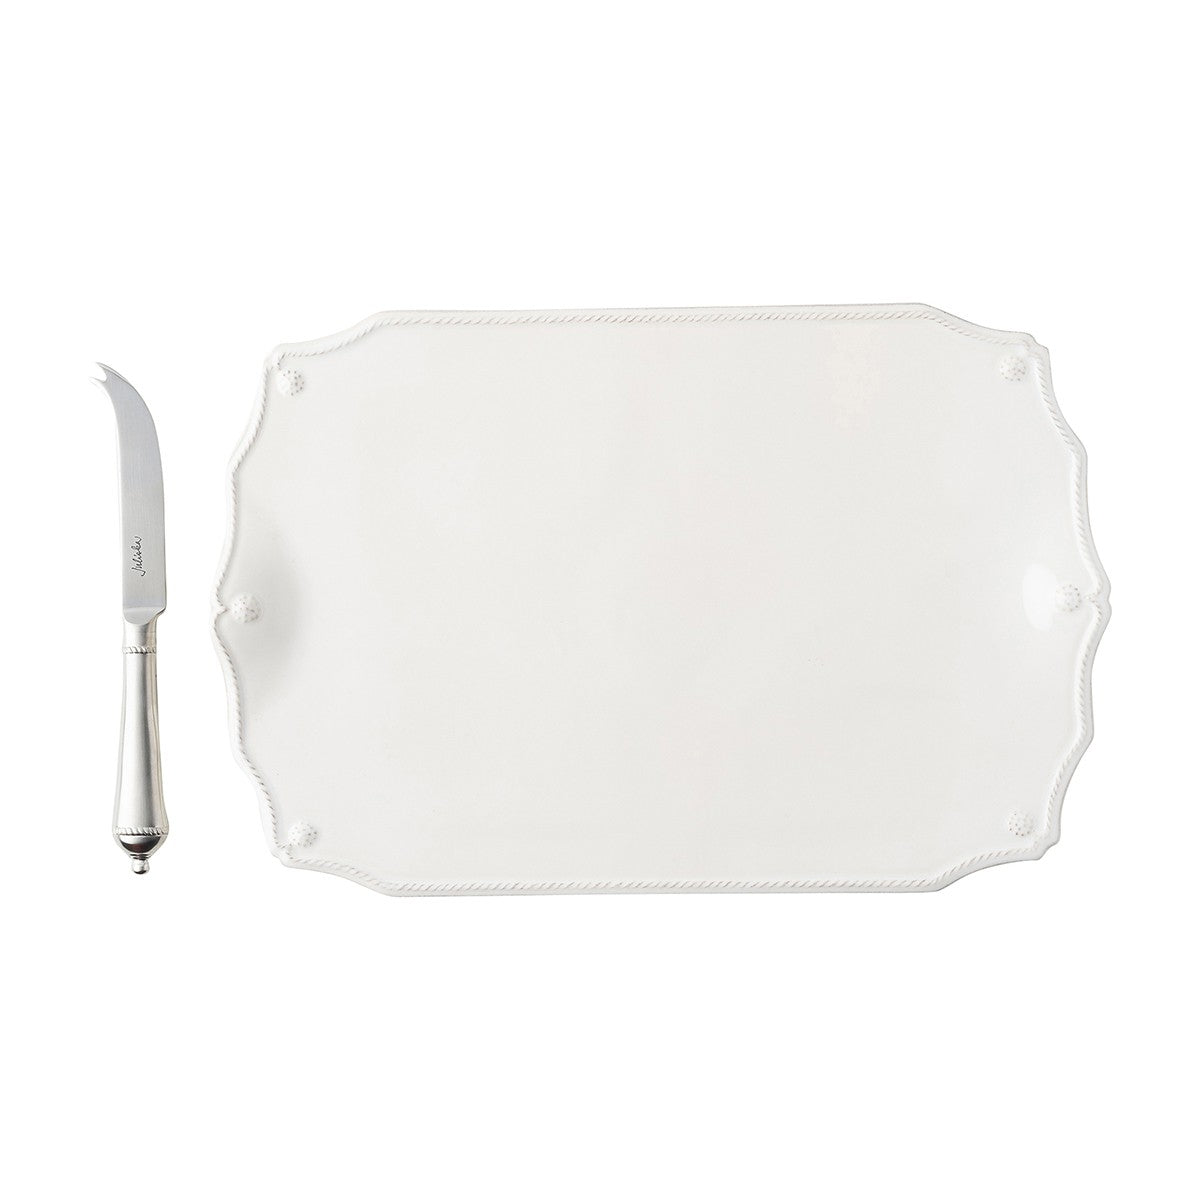 Berry & Thread Whitewash 15" Serving Board with Knife